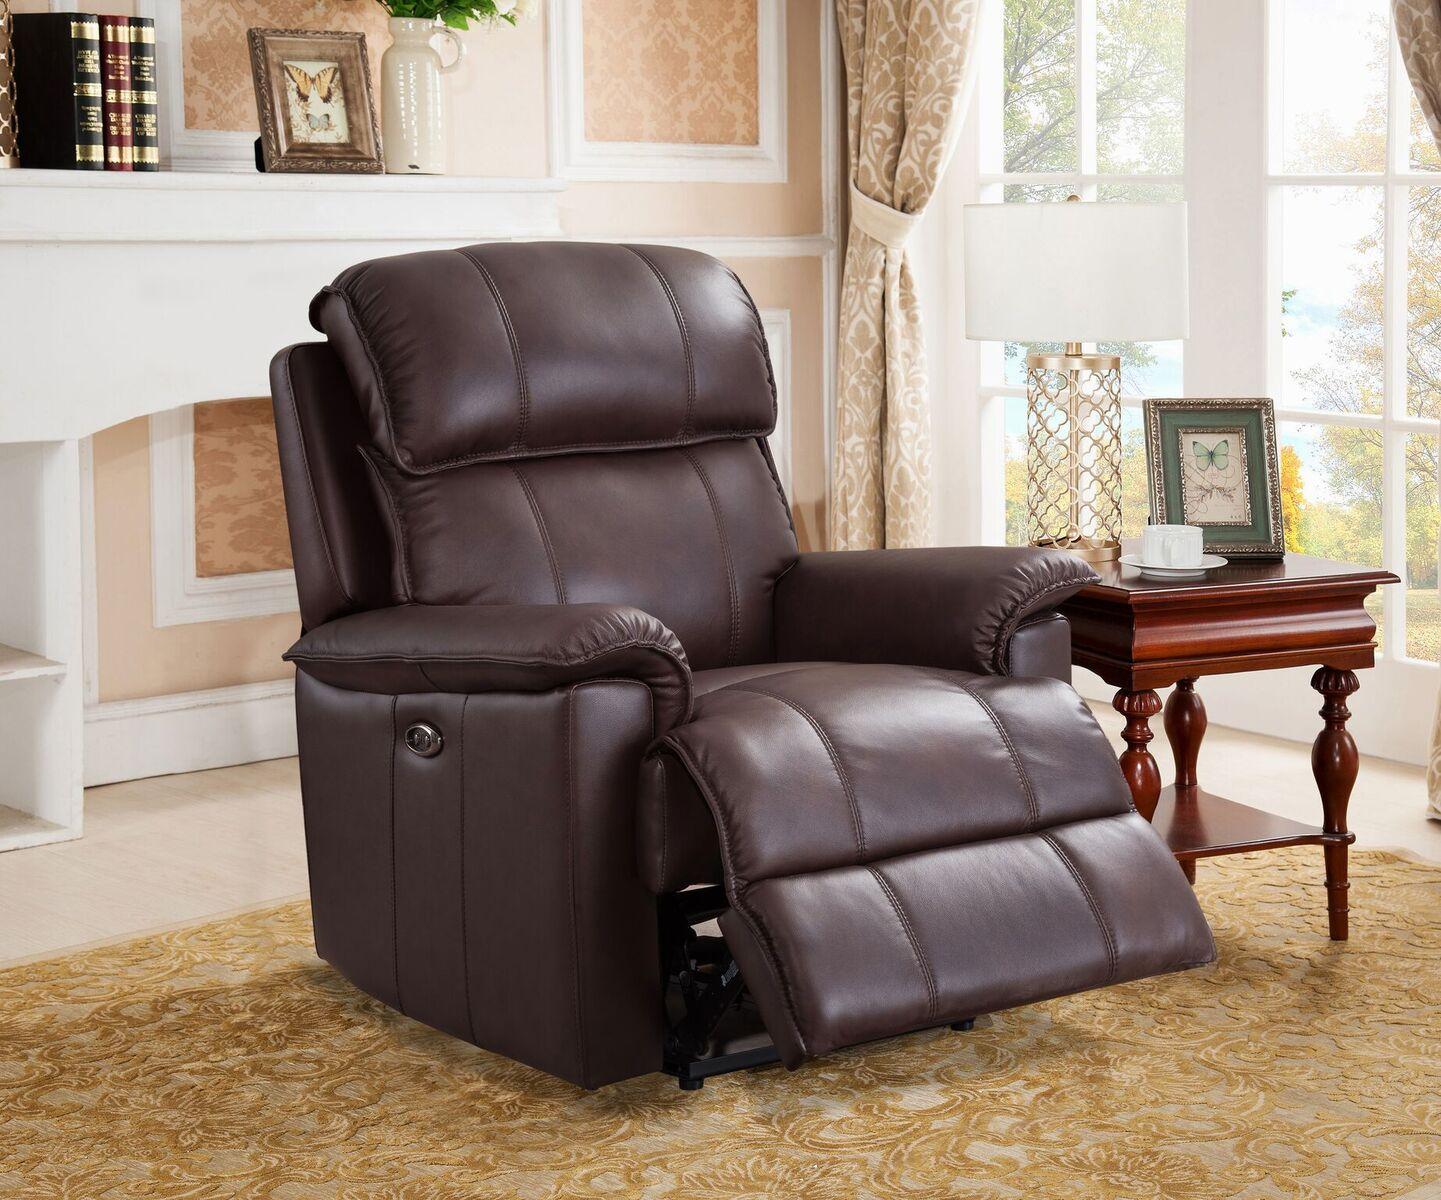 

    
Top Grain Leather Brown Power Recliner Hydeline Harwood Amax Leather Modern
